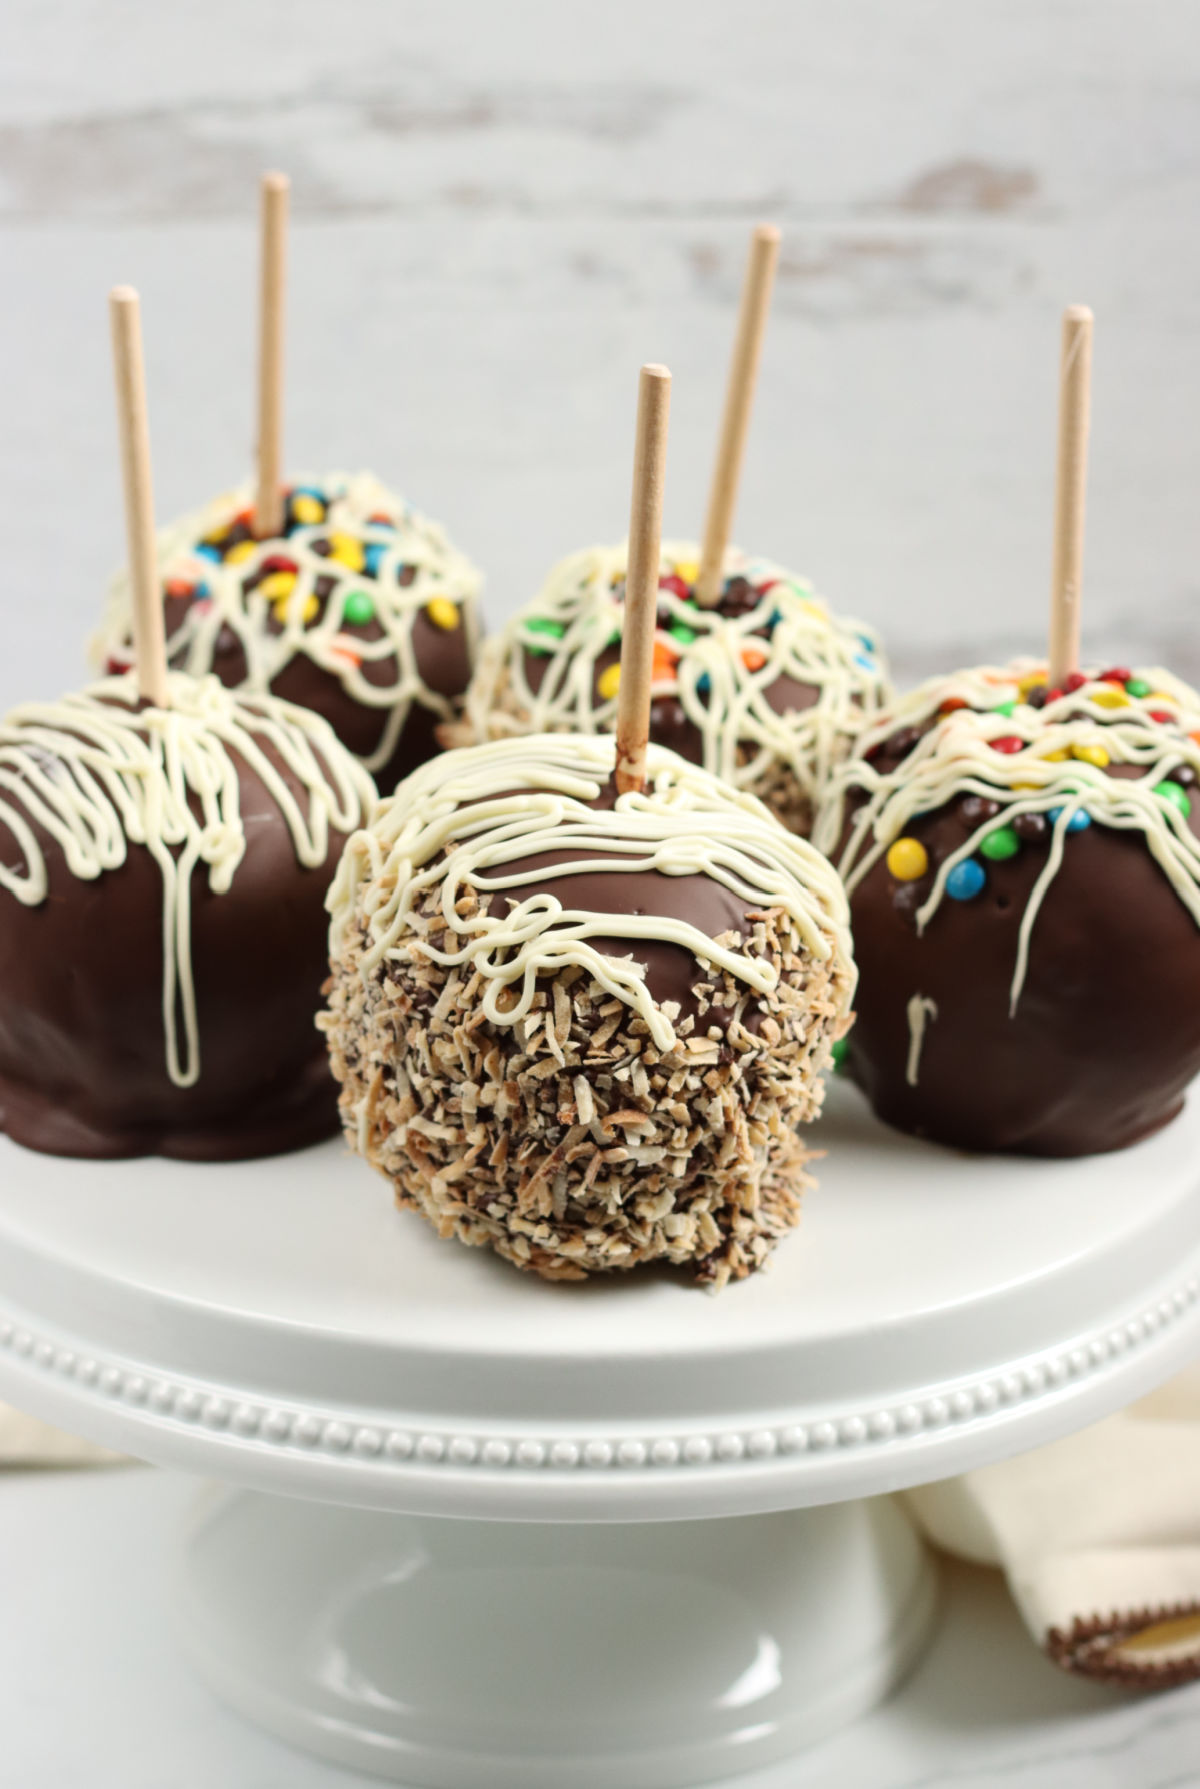 Caramel chocolate apples rolled in candies on white footed cake dish.